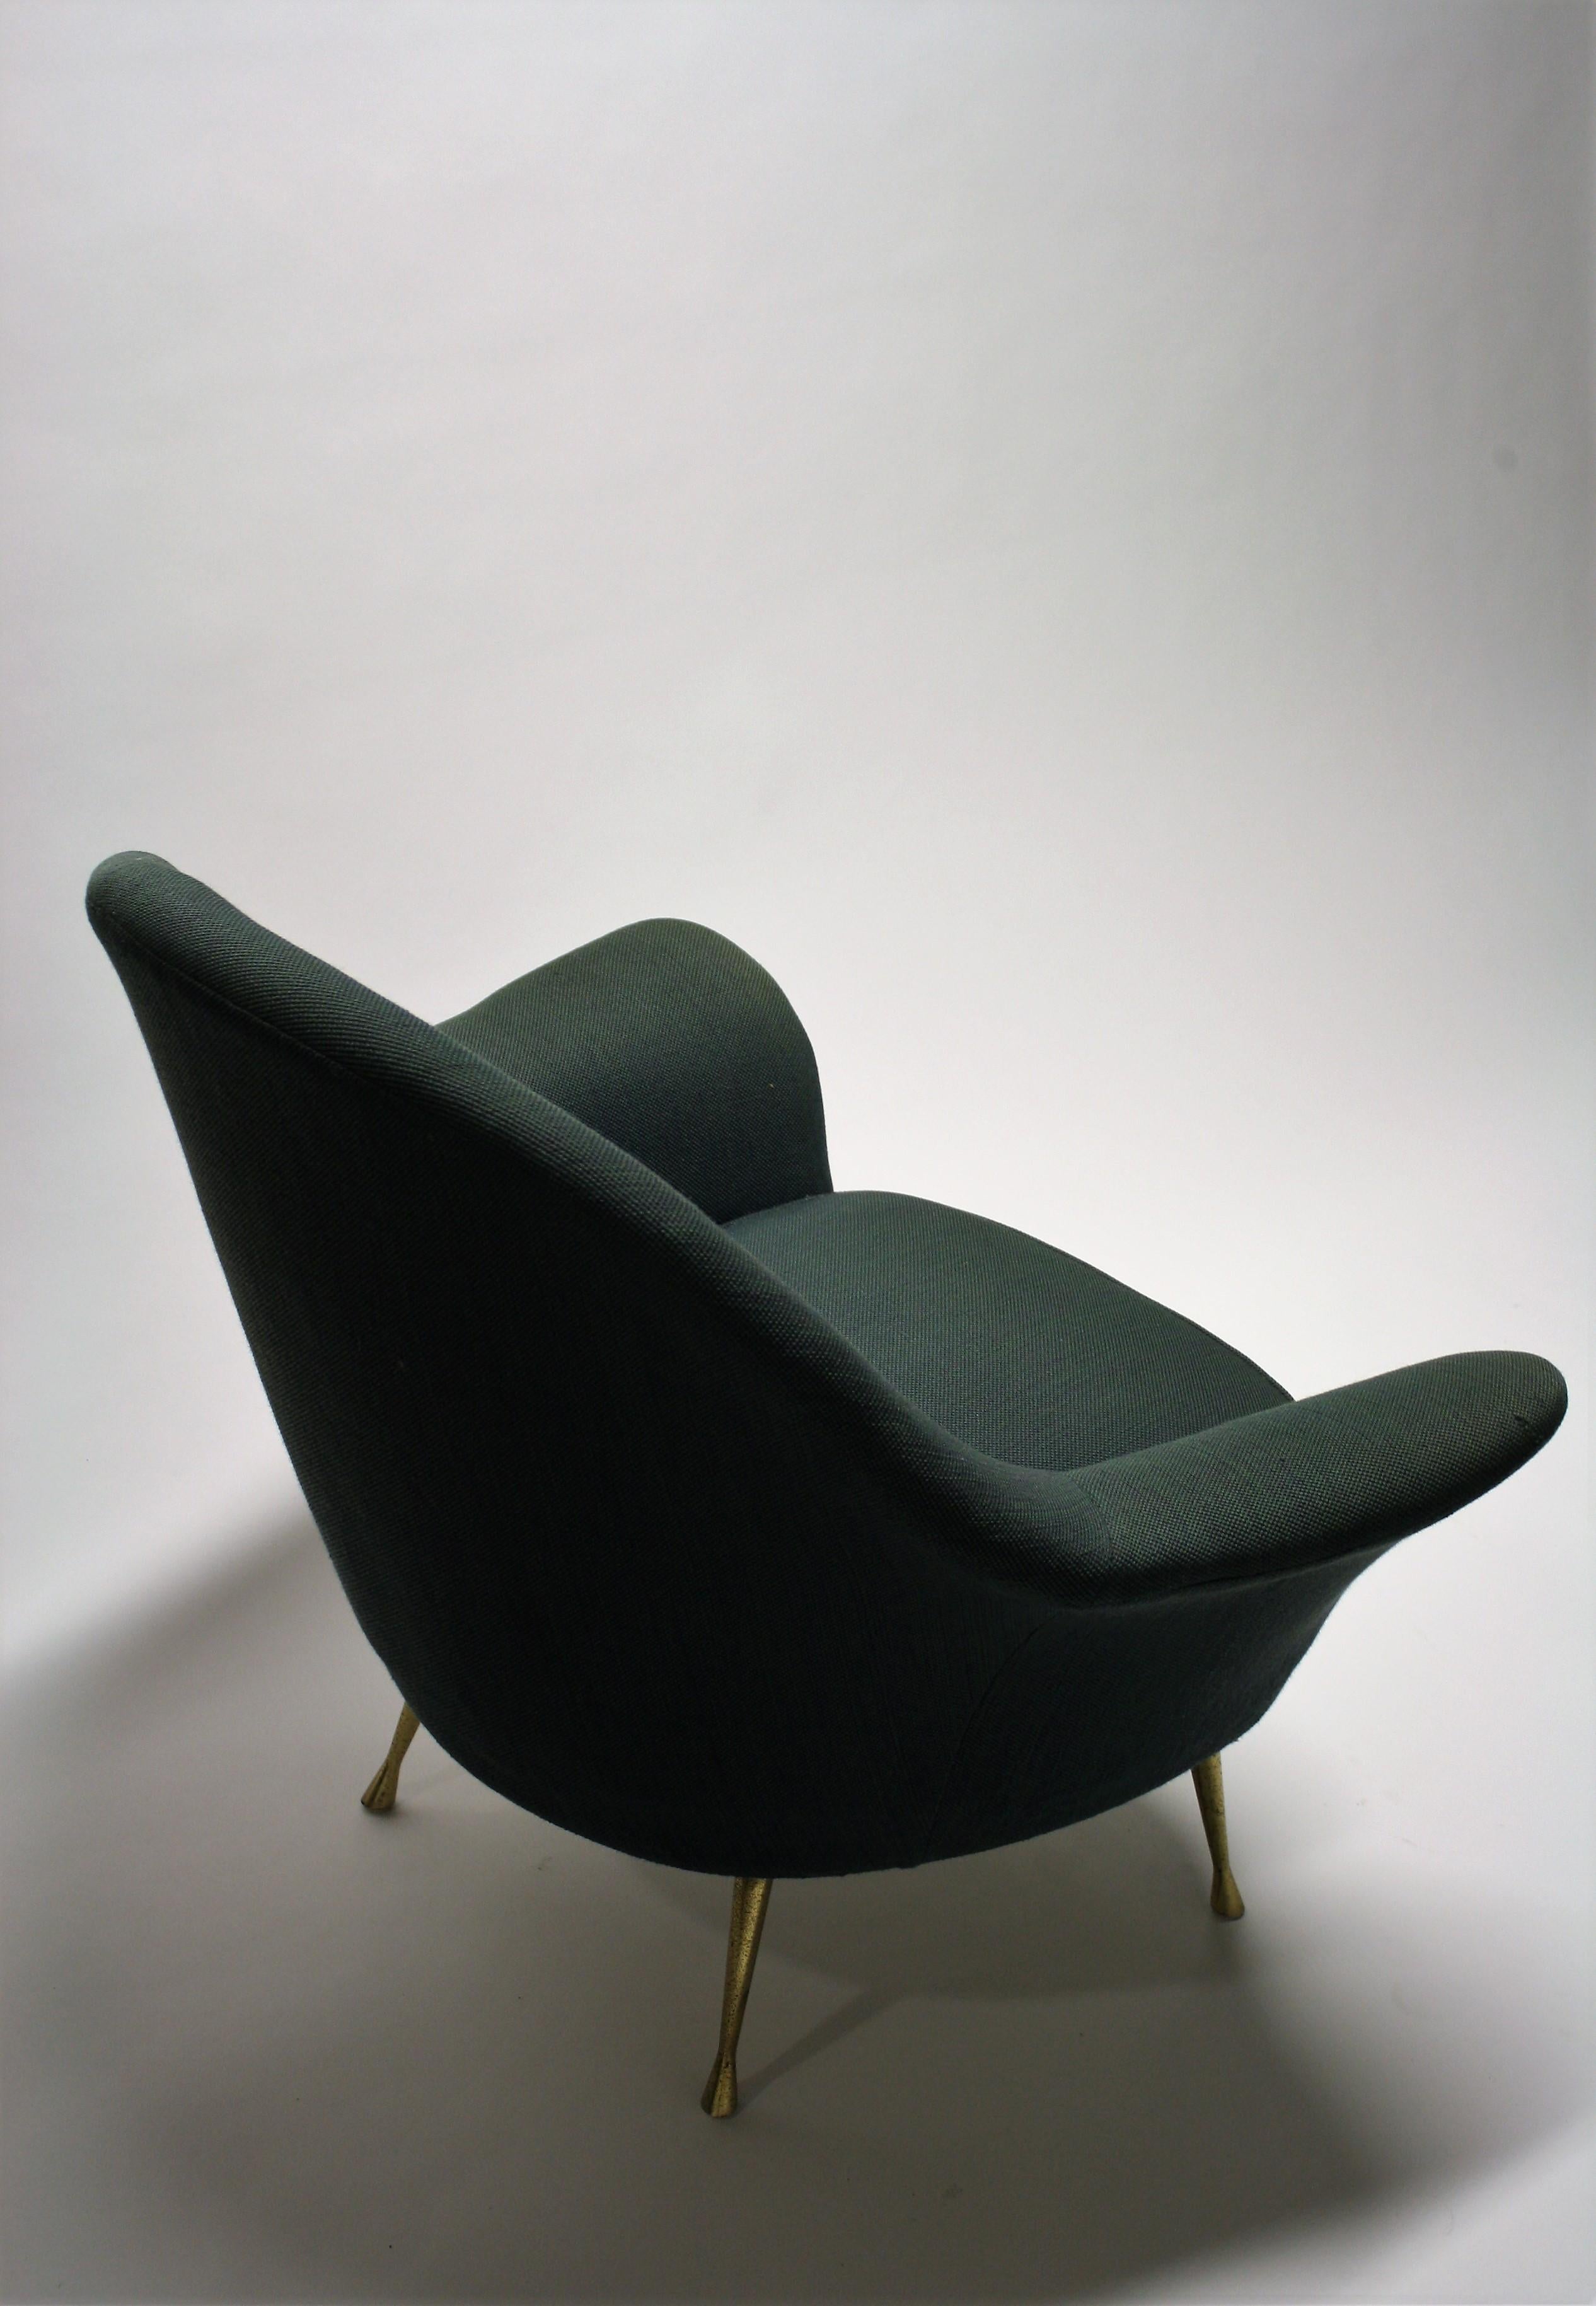 Vintage Italian Lounge Chair or Club Chair, 1950s (Messing)